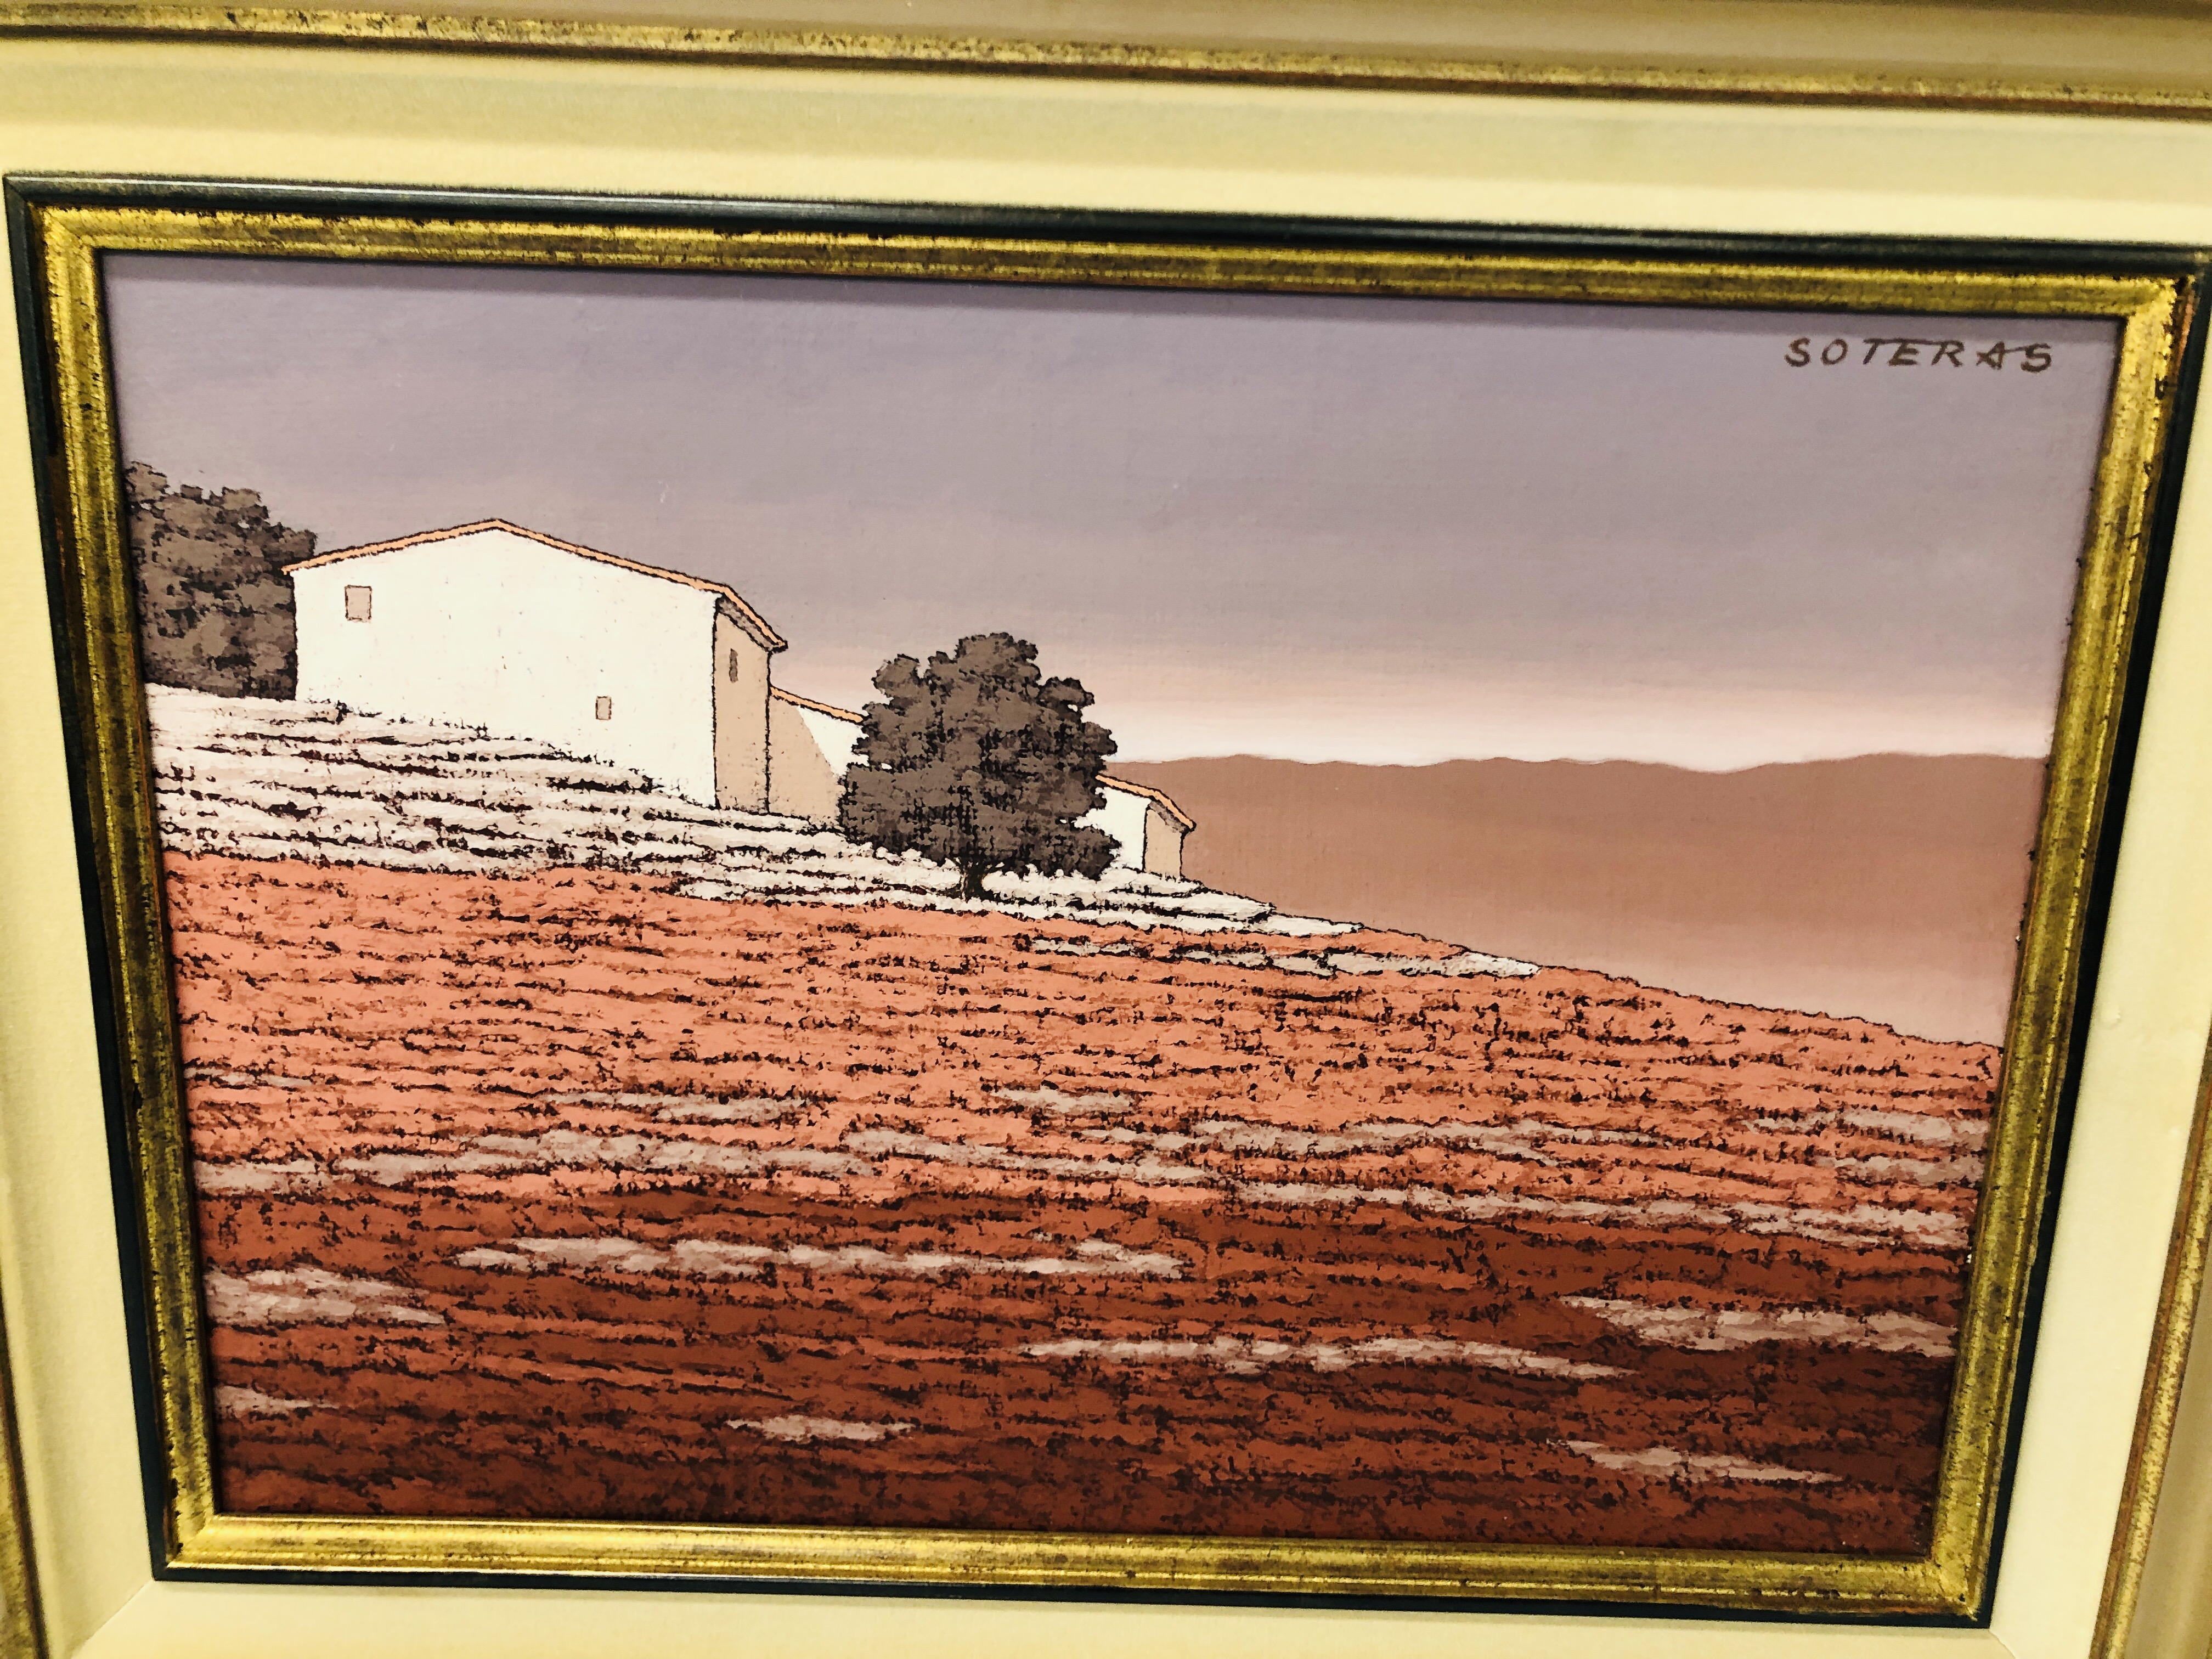 OIL ON CANVAS SPANISH HOUSE ON A HILL FRAMED AND MOUNTED BEARING SIGNATURE JORGE SORTERAS 44. - Image 2 of 4